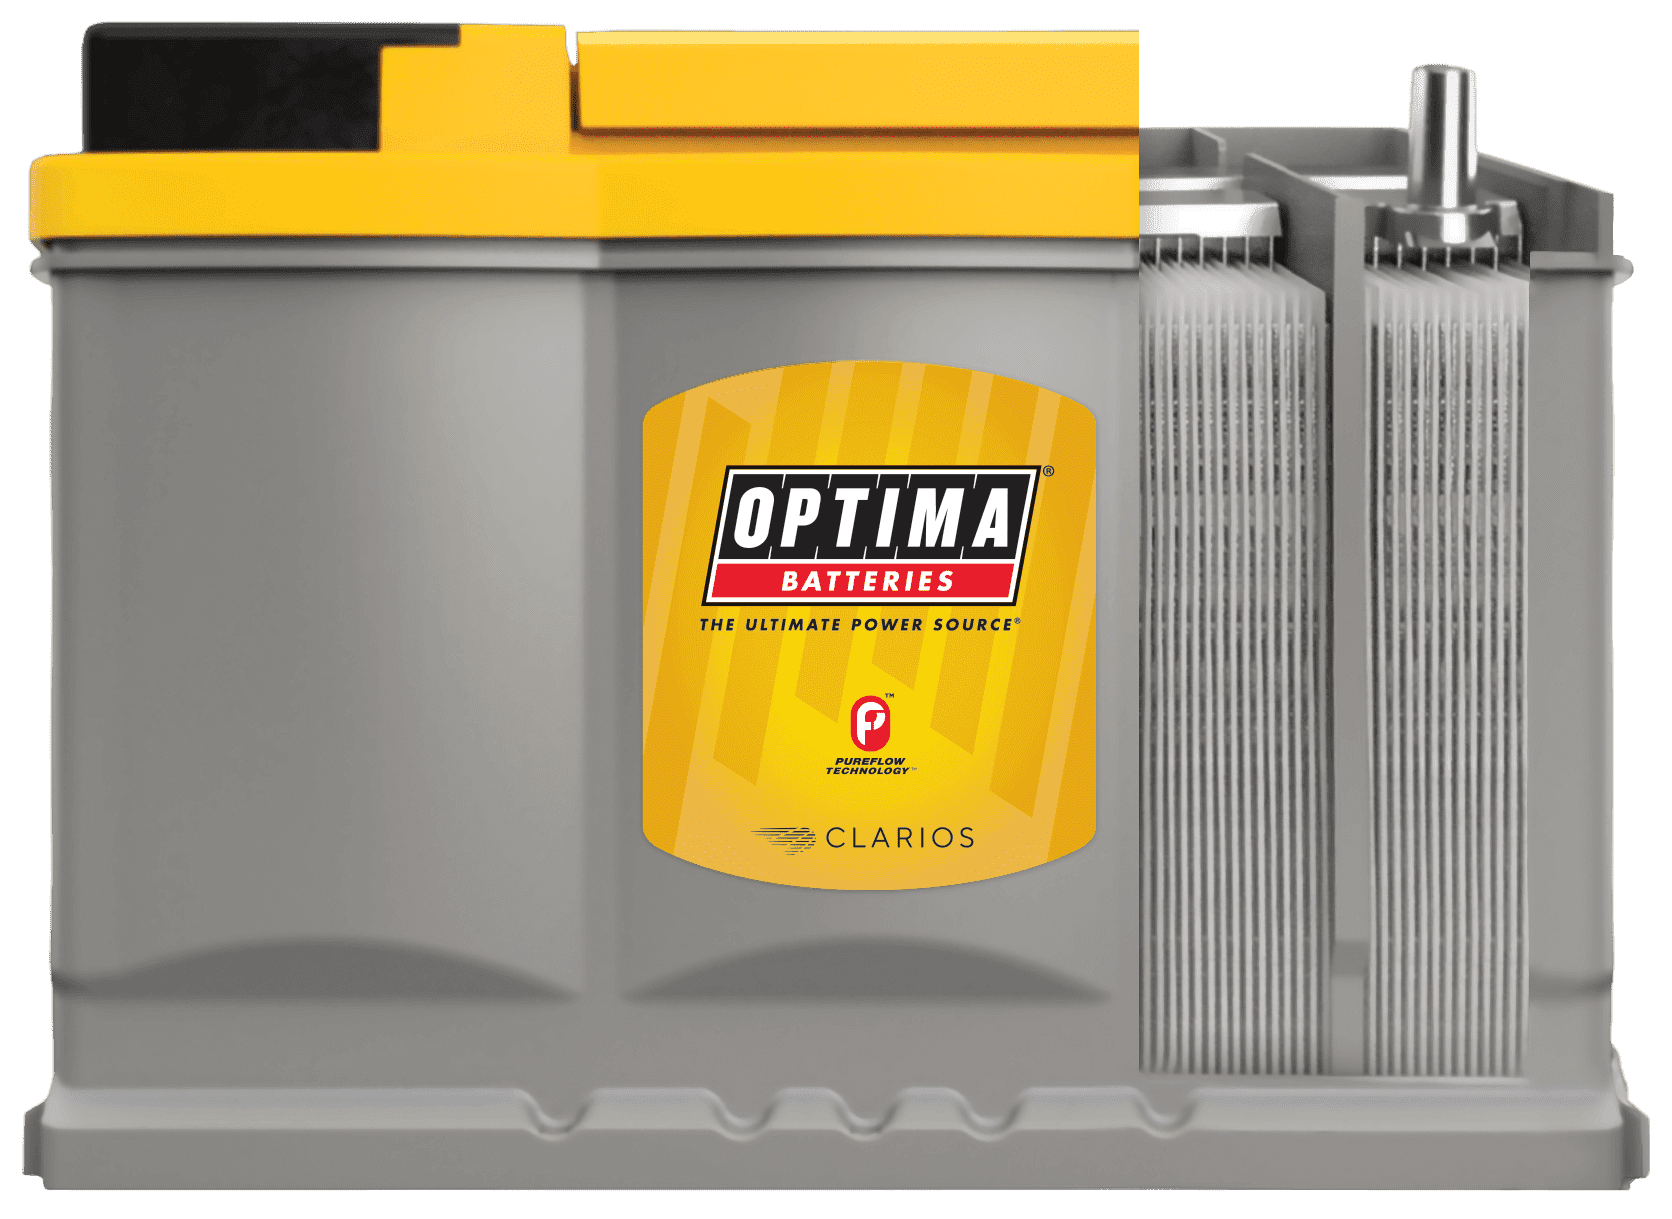 OPTIMA® YELLOWTOP® is a true dual-purpose battery, delivering ultimate starting power and deep-cycling in one complete package